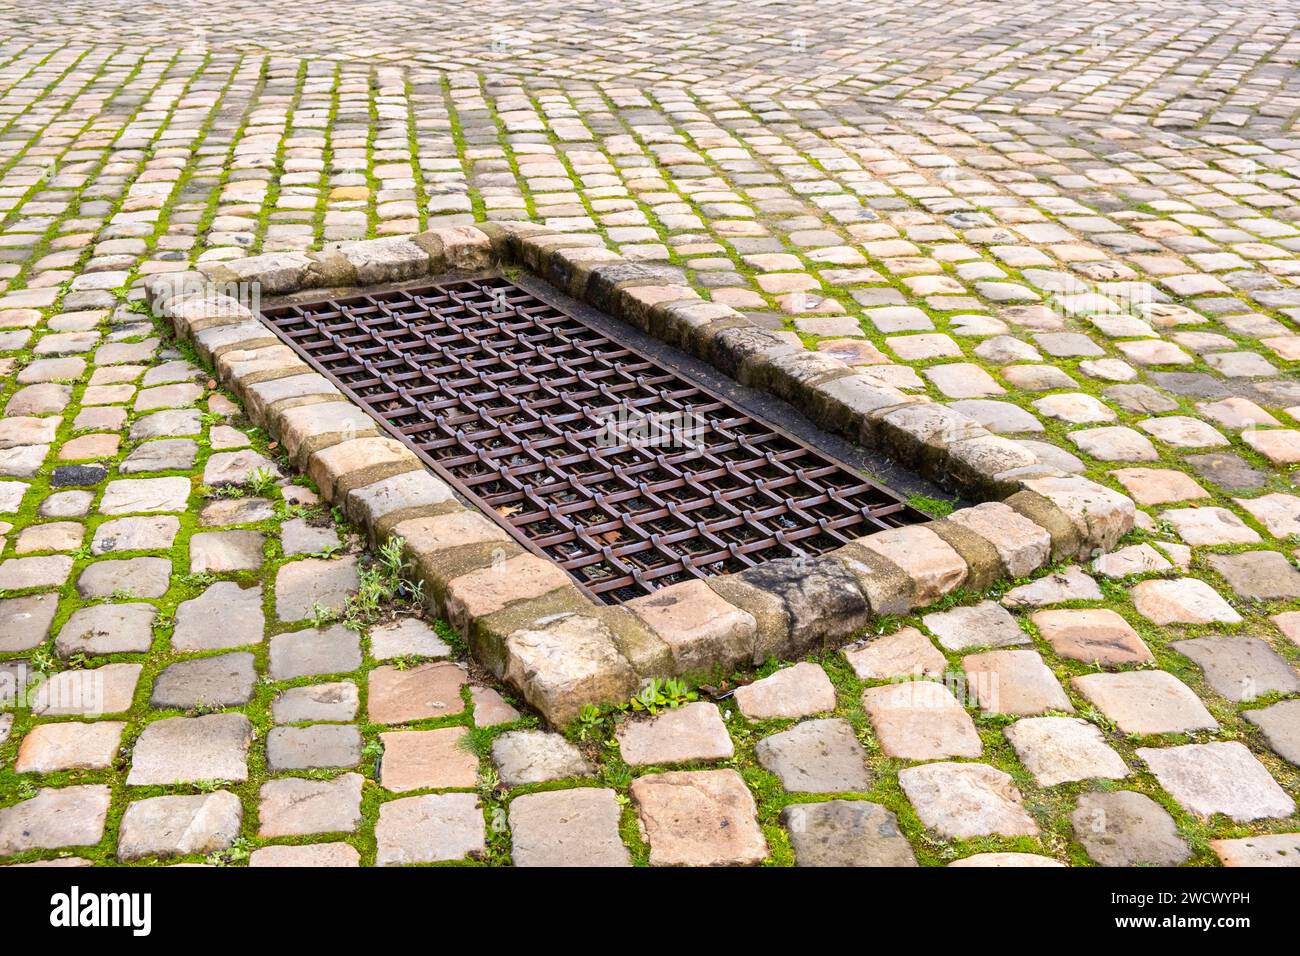 France, Paris, Philippe Auguste enclosure, square courtyard of the Louvre, rectangular grid serving as a cistern probably to collect rainwater, Keep of the Chateau Fort Stock Photo